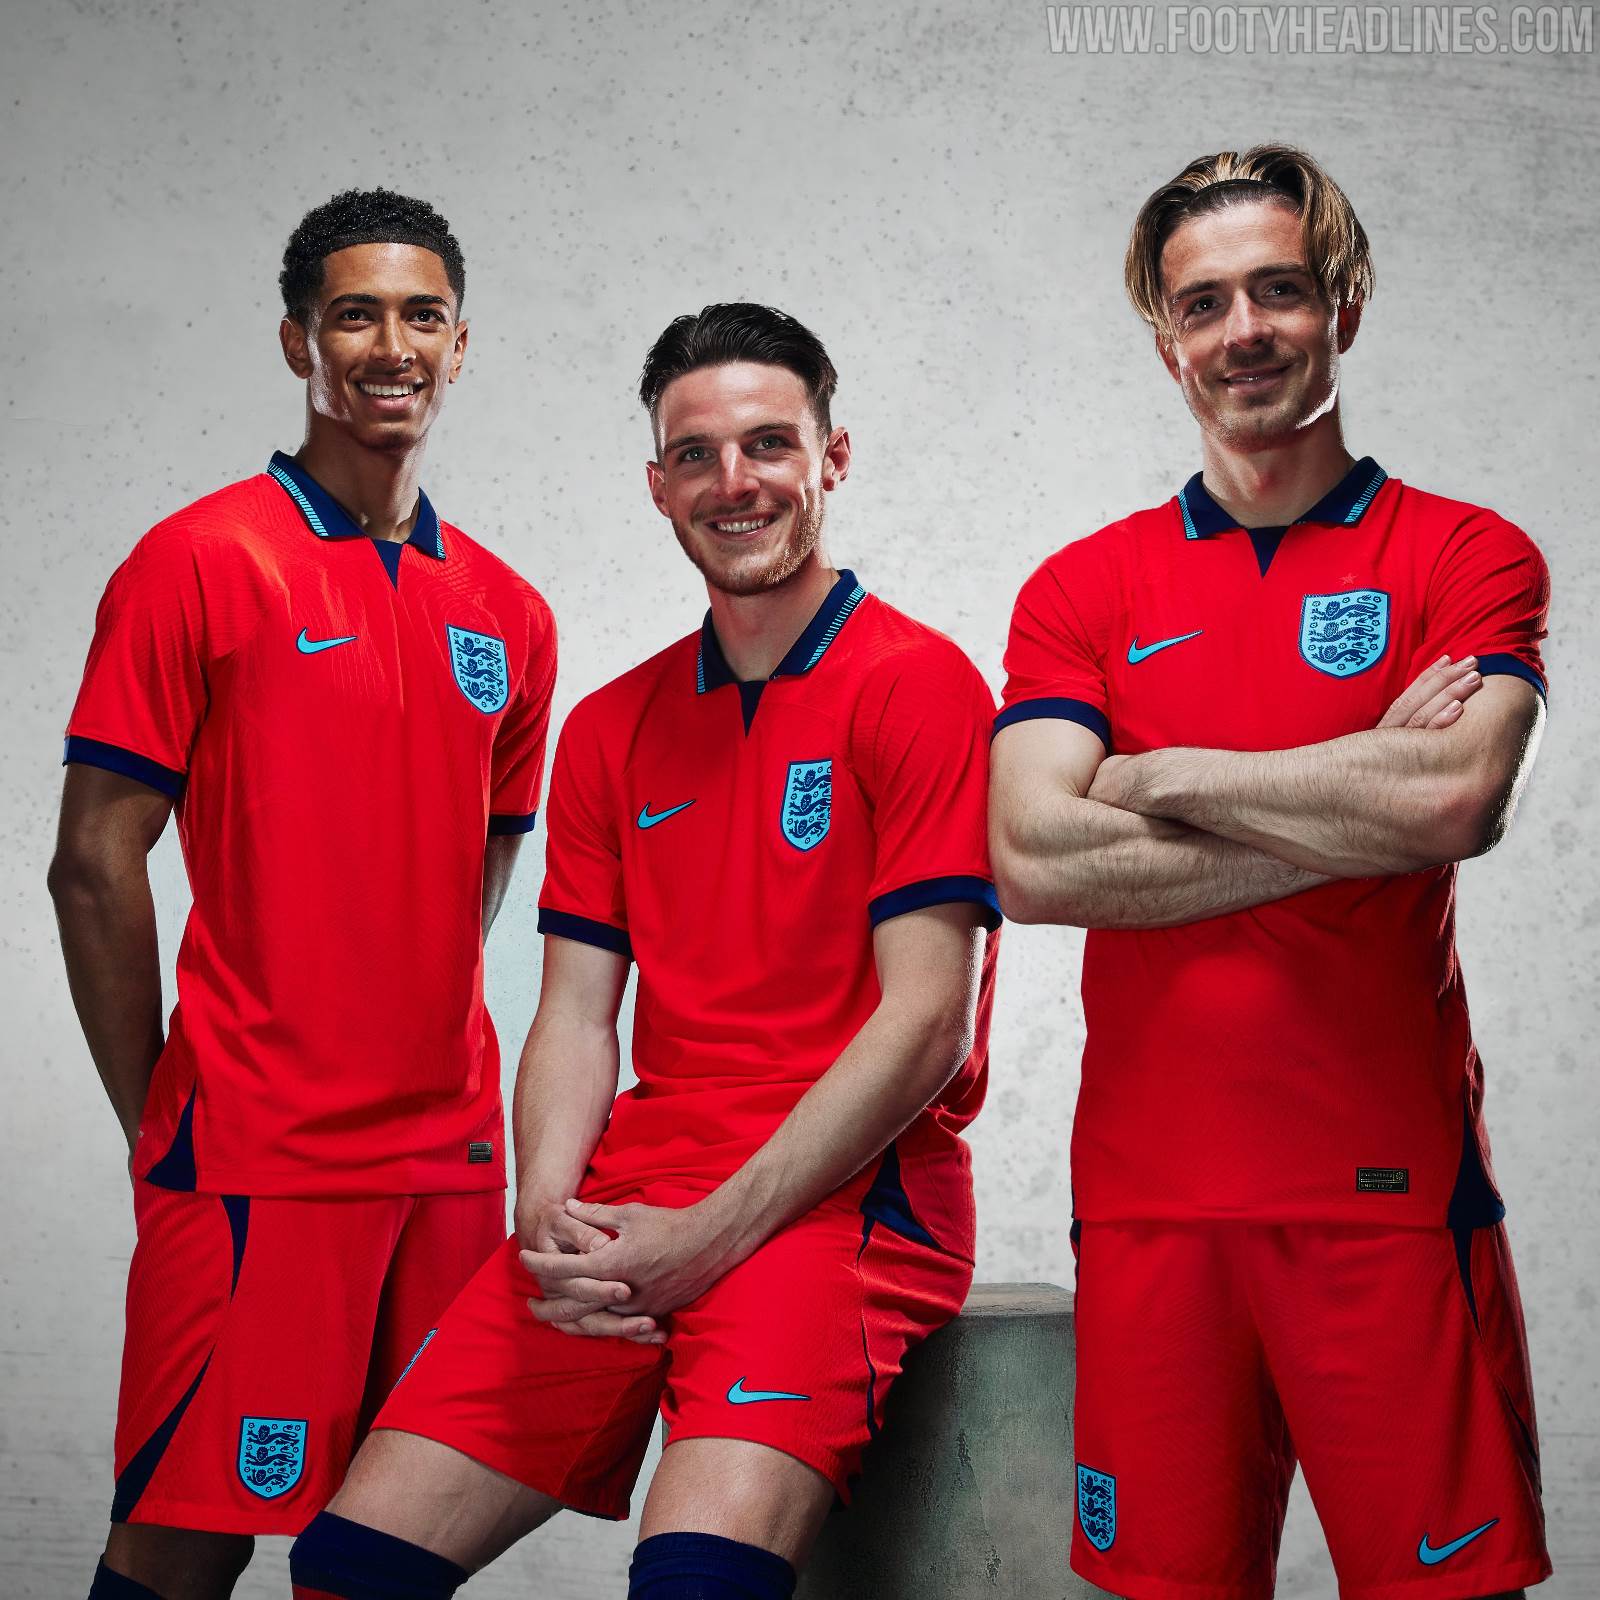 England 2022 World Cup Home and Away Kits Released